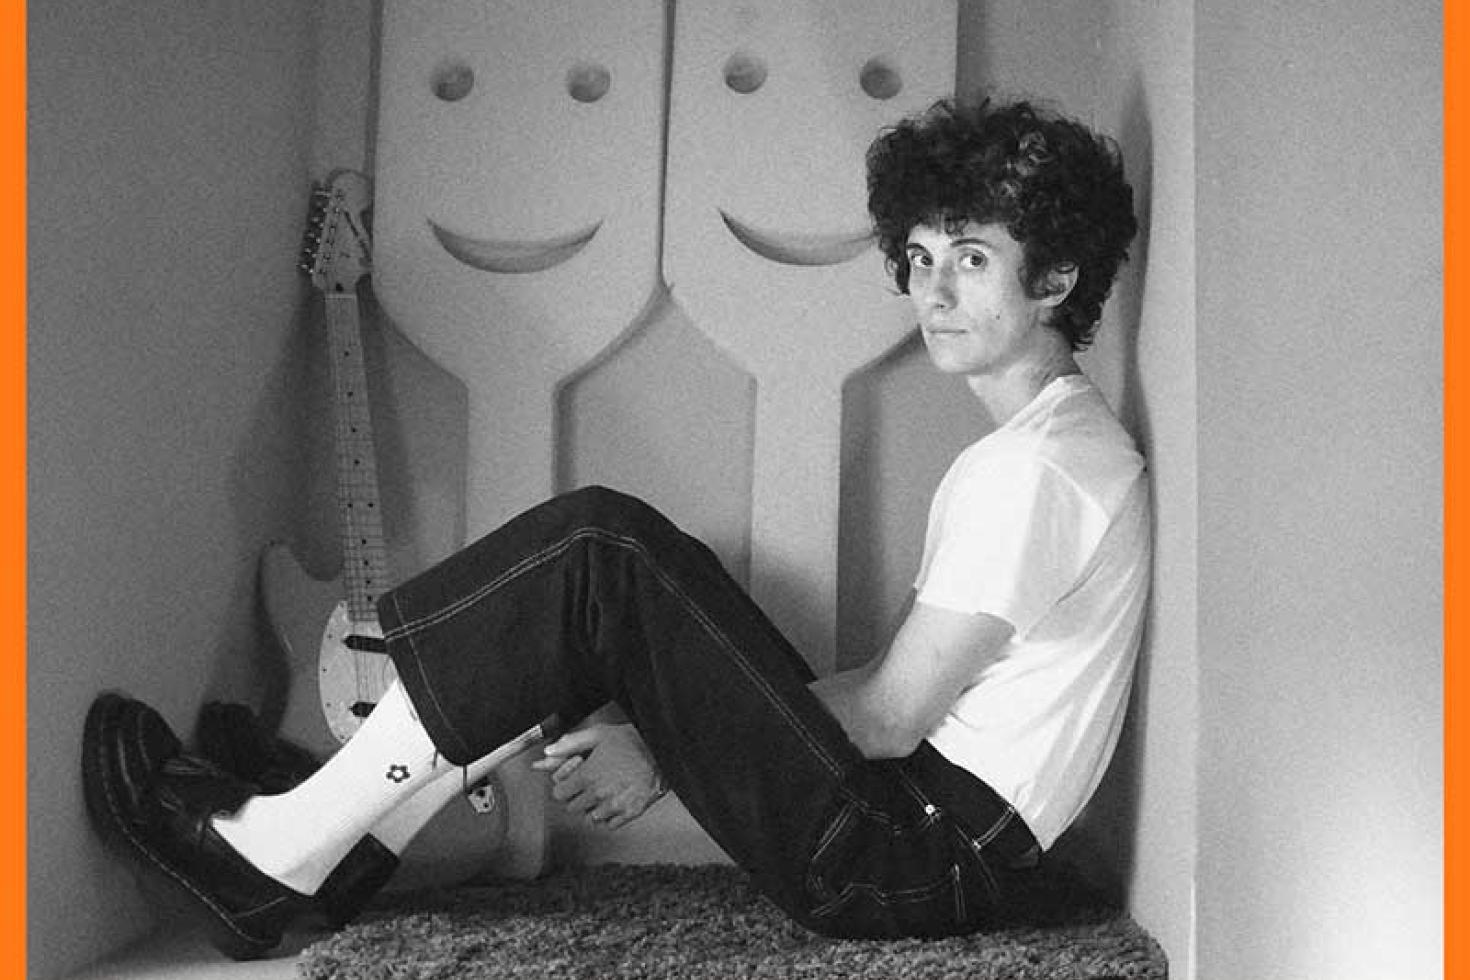 Ron Gallo shares final single ahead of album release